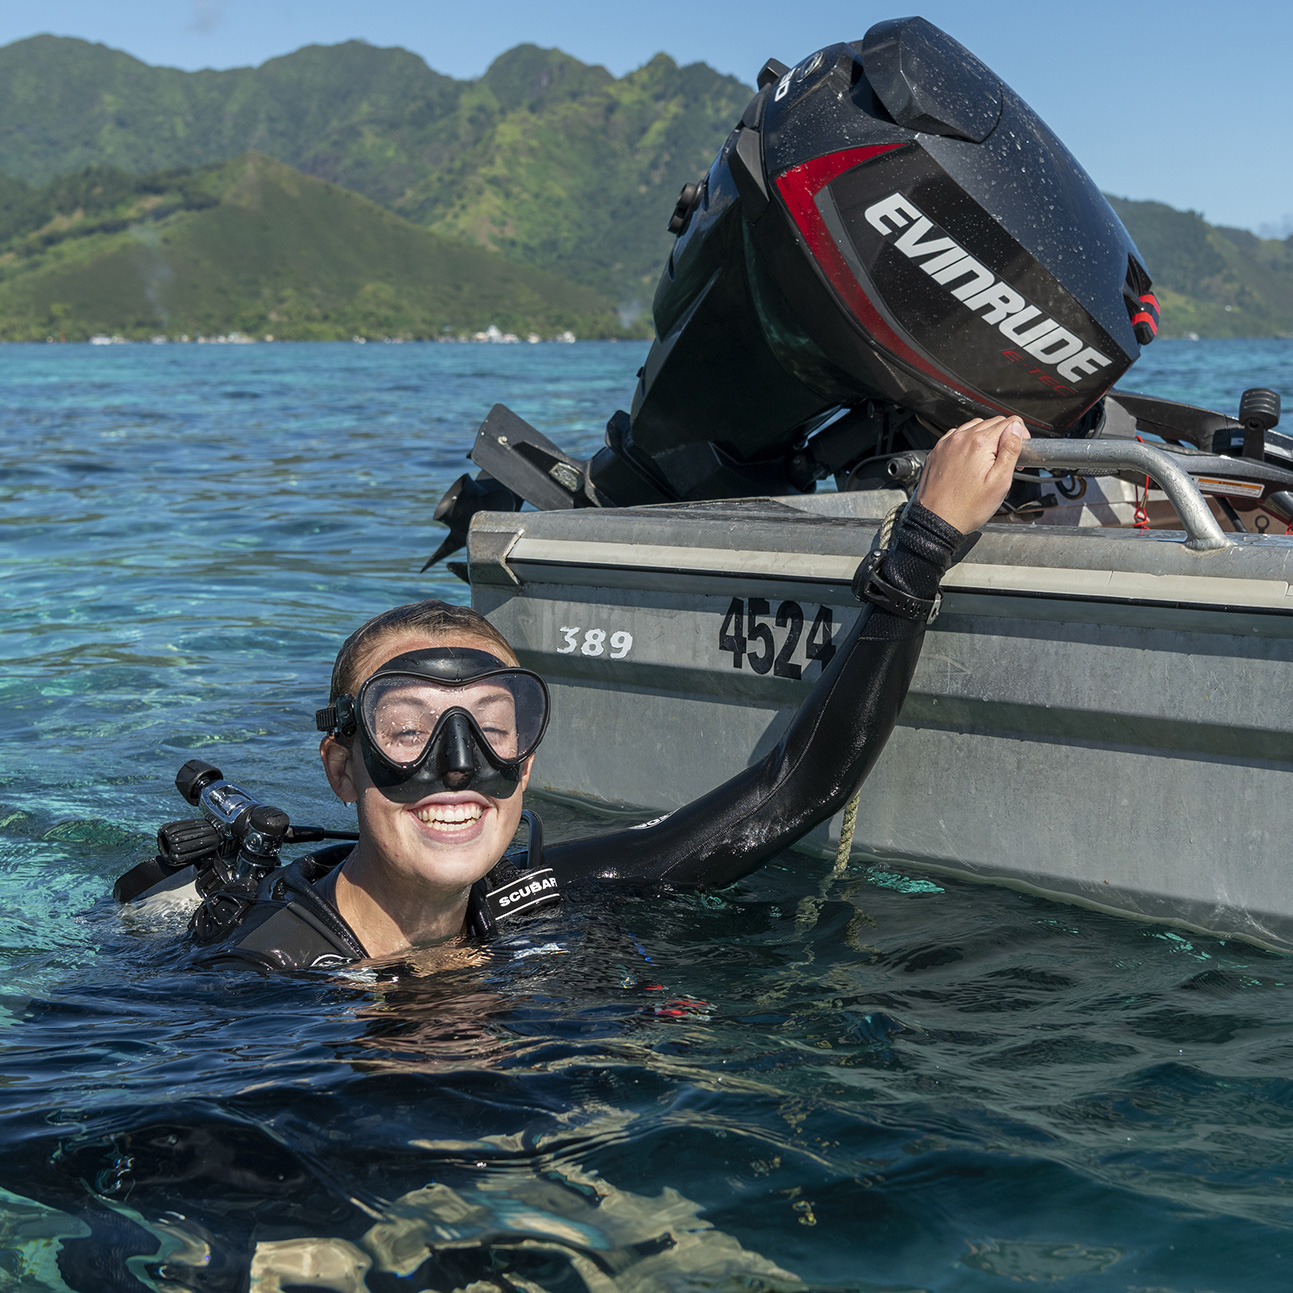 Smiling female diver surfacing by her boat